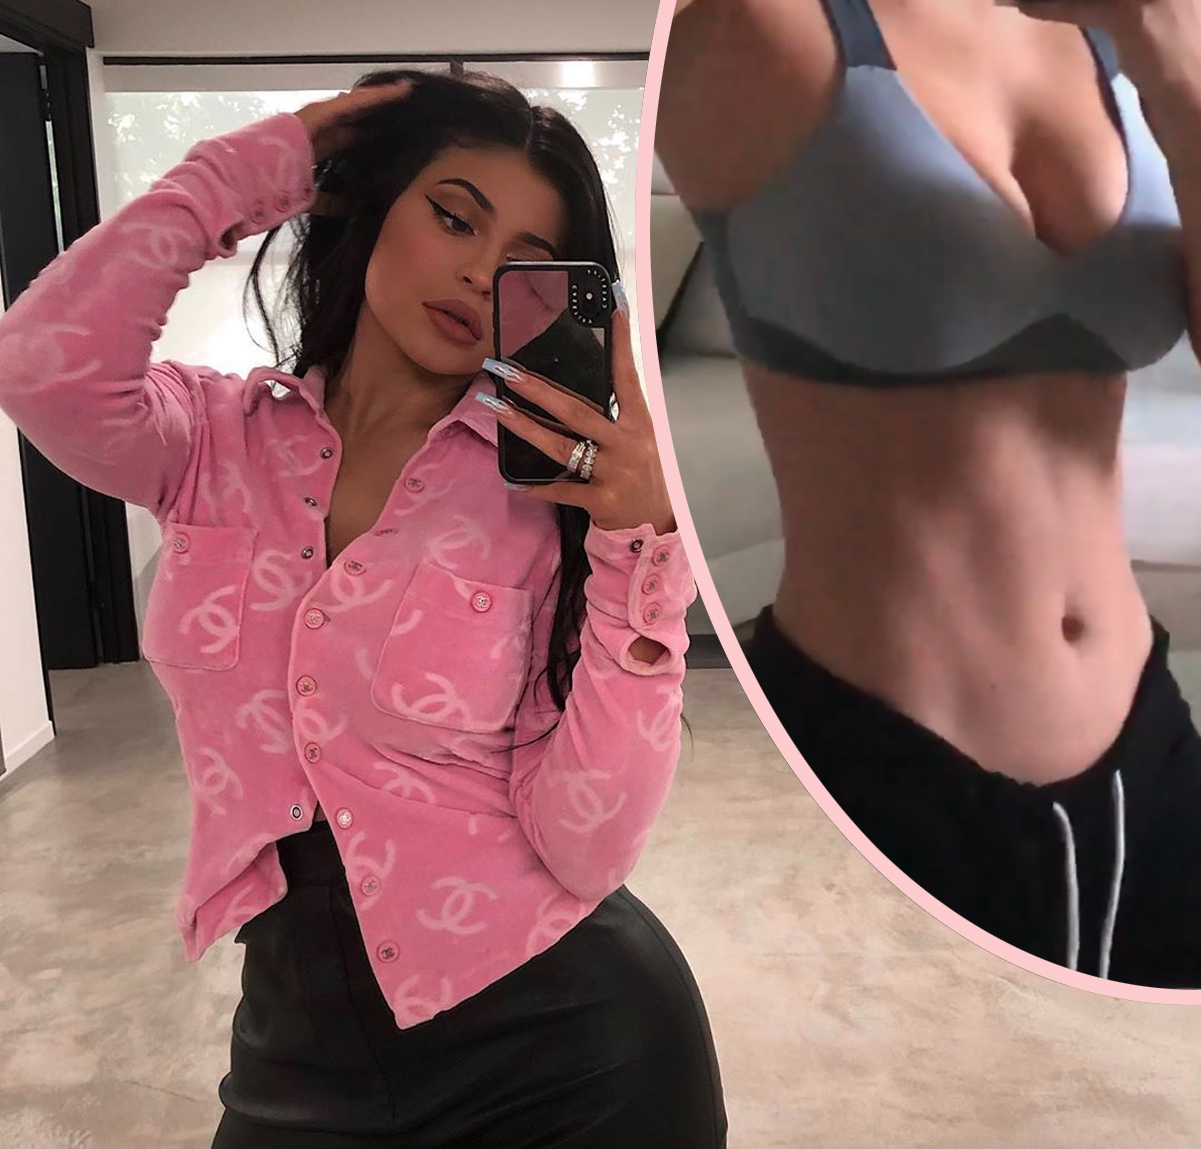 Is Kylie Jenner Being Irresponsible Showing Off Her Post-Illness Body?? - Perez  Hilton